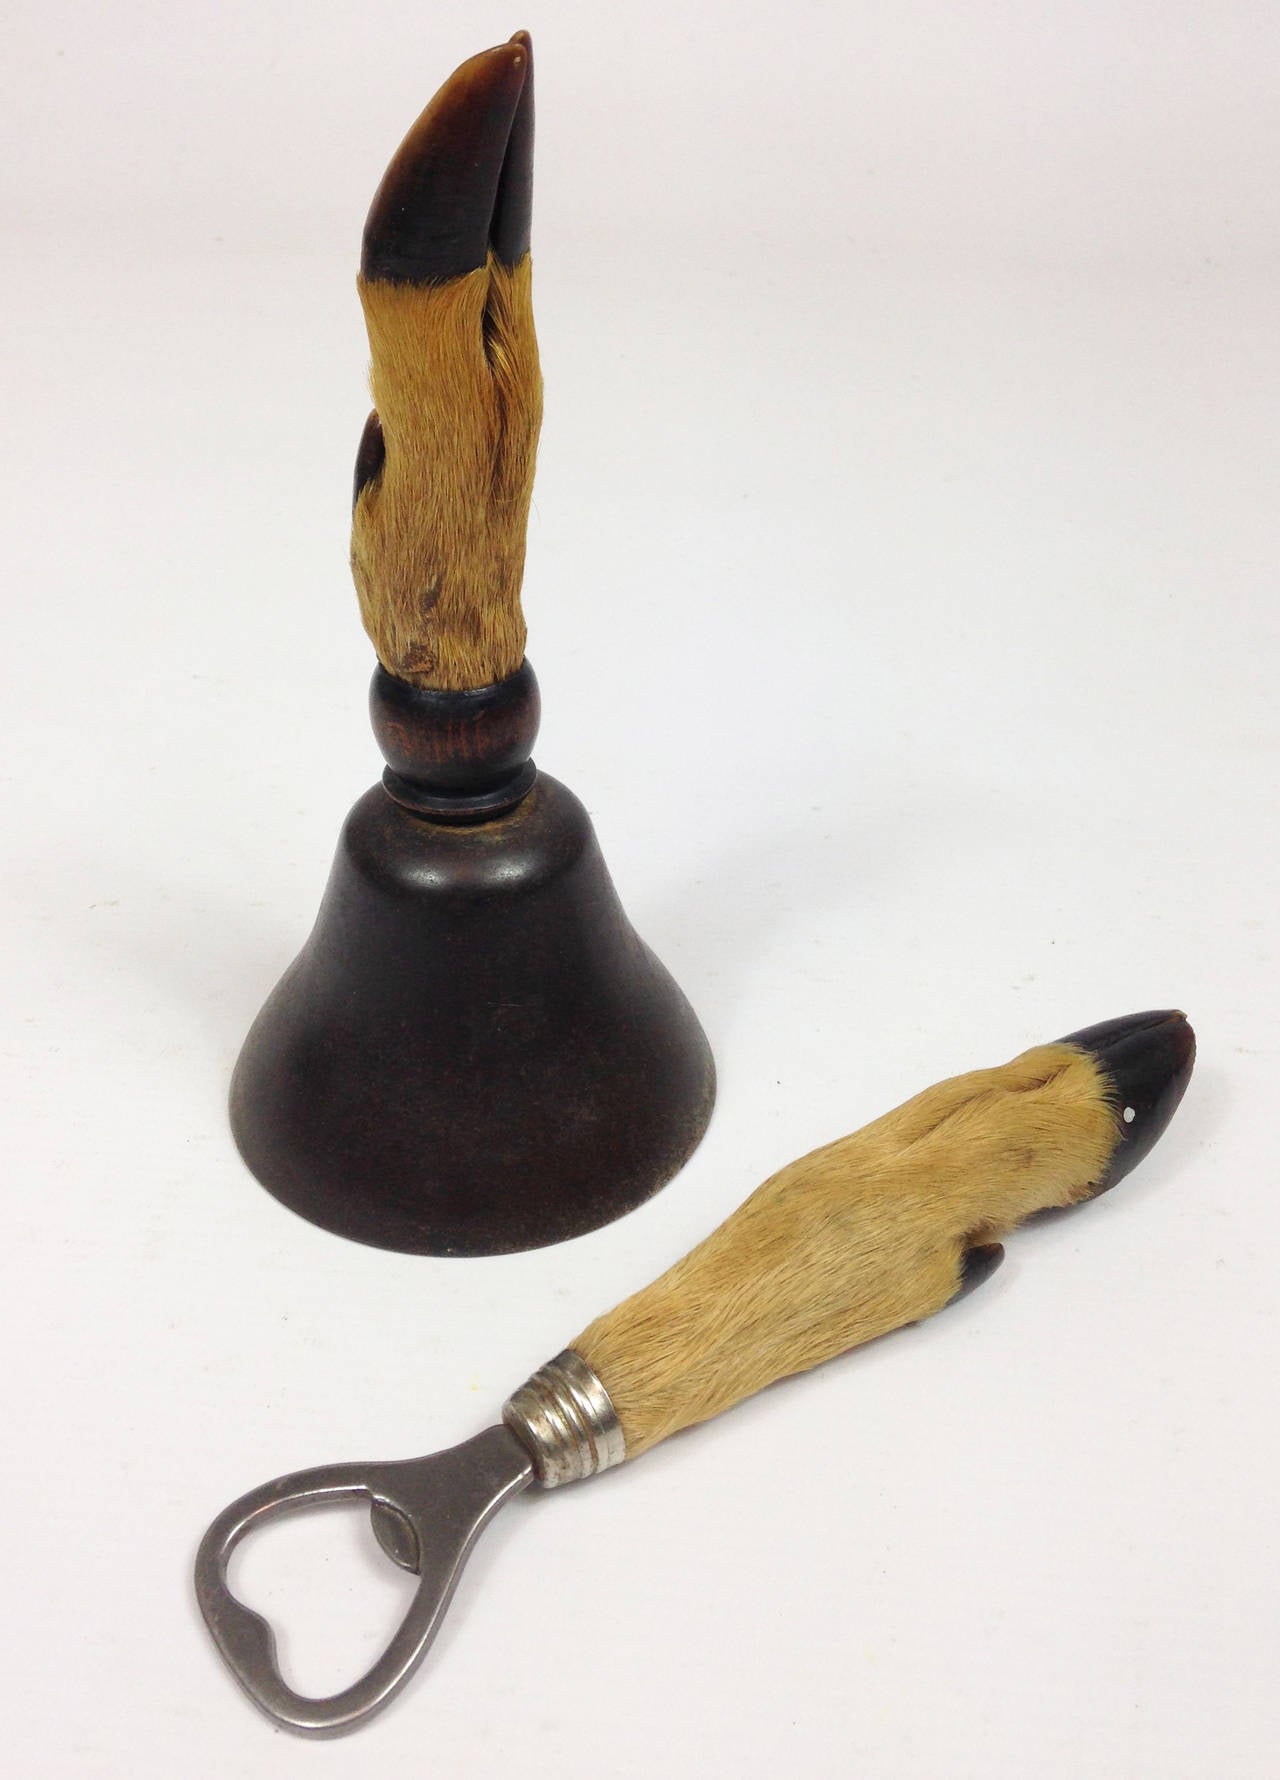 A rare pair of Scottish Victorian items, consisting of a small steel bell and steel bottle opener. Both with unusual deer hoof handles.

Each is in very fine condition. The measurements stated are the approximate size of the bell at its widest.